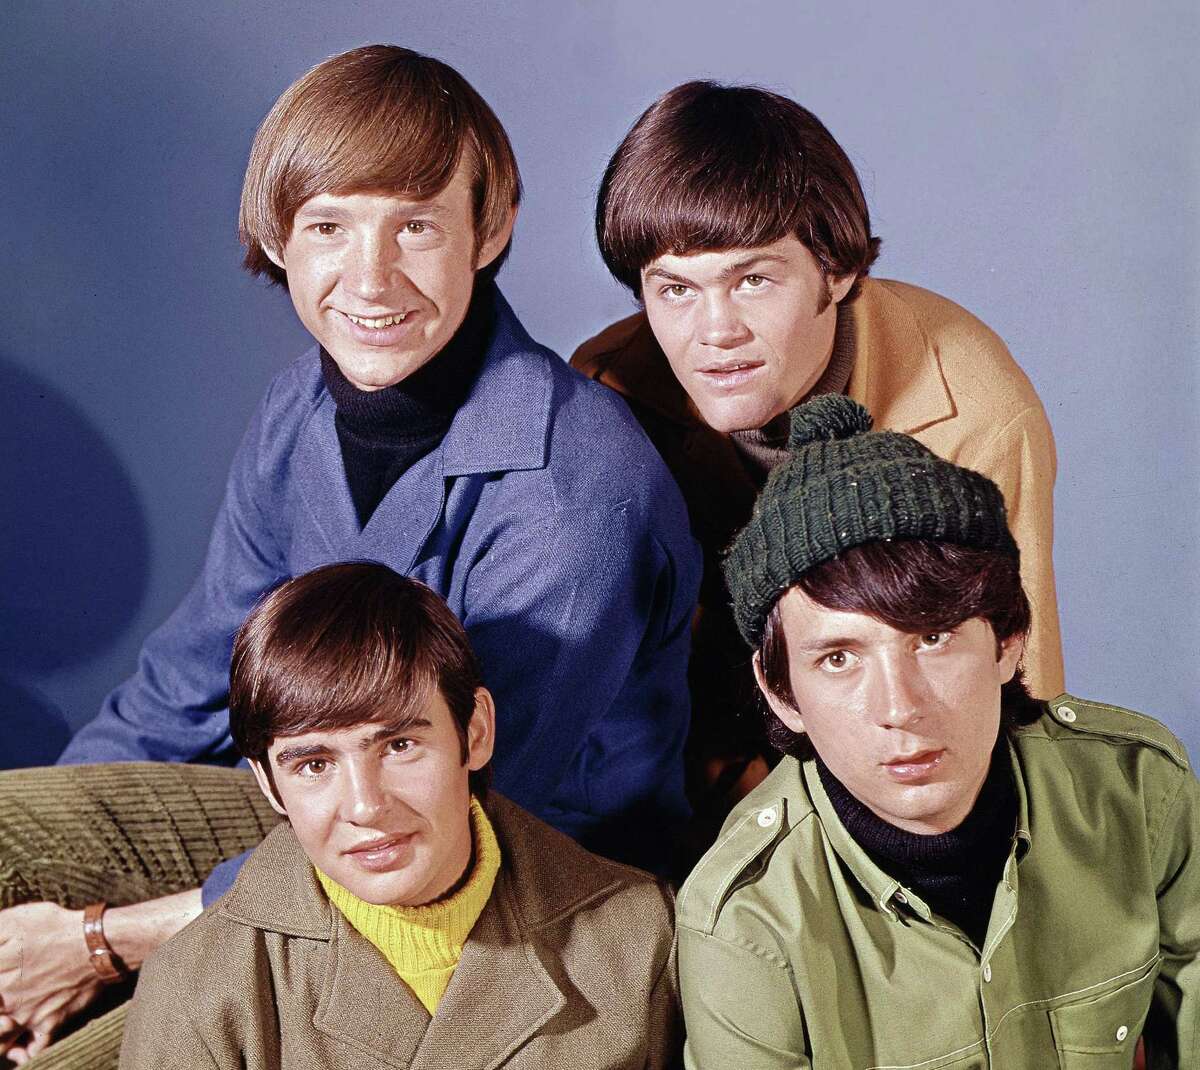 “The Monkees,” in 1966. Clockwise from top left: Peter Tork, Micky Dolenz, Mike Nesmith and Davy Jones.